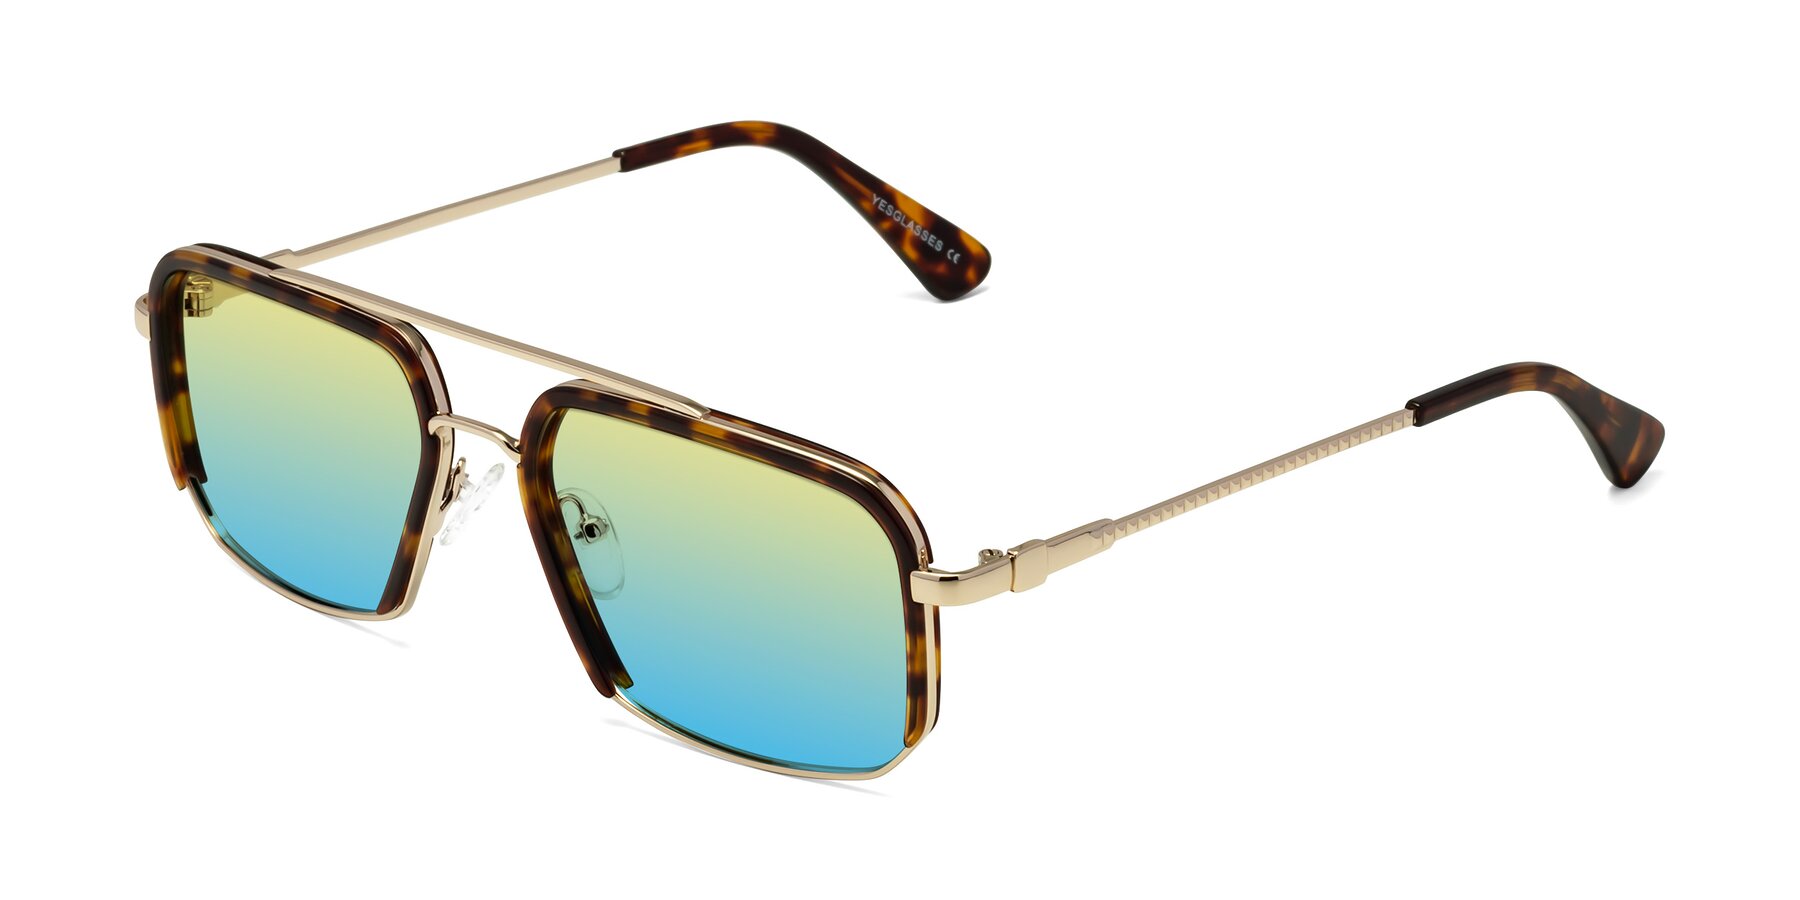 Angle of Dechter in Tortoise-Gold with Yellow / Blue Gradient Lenses